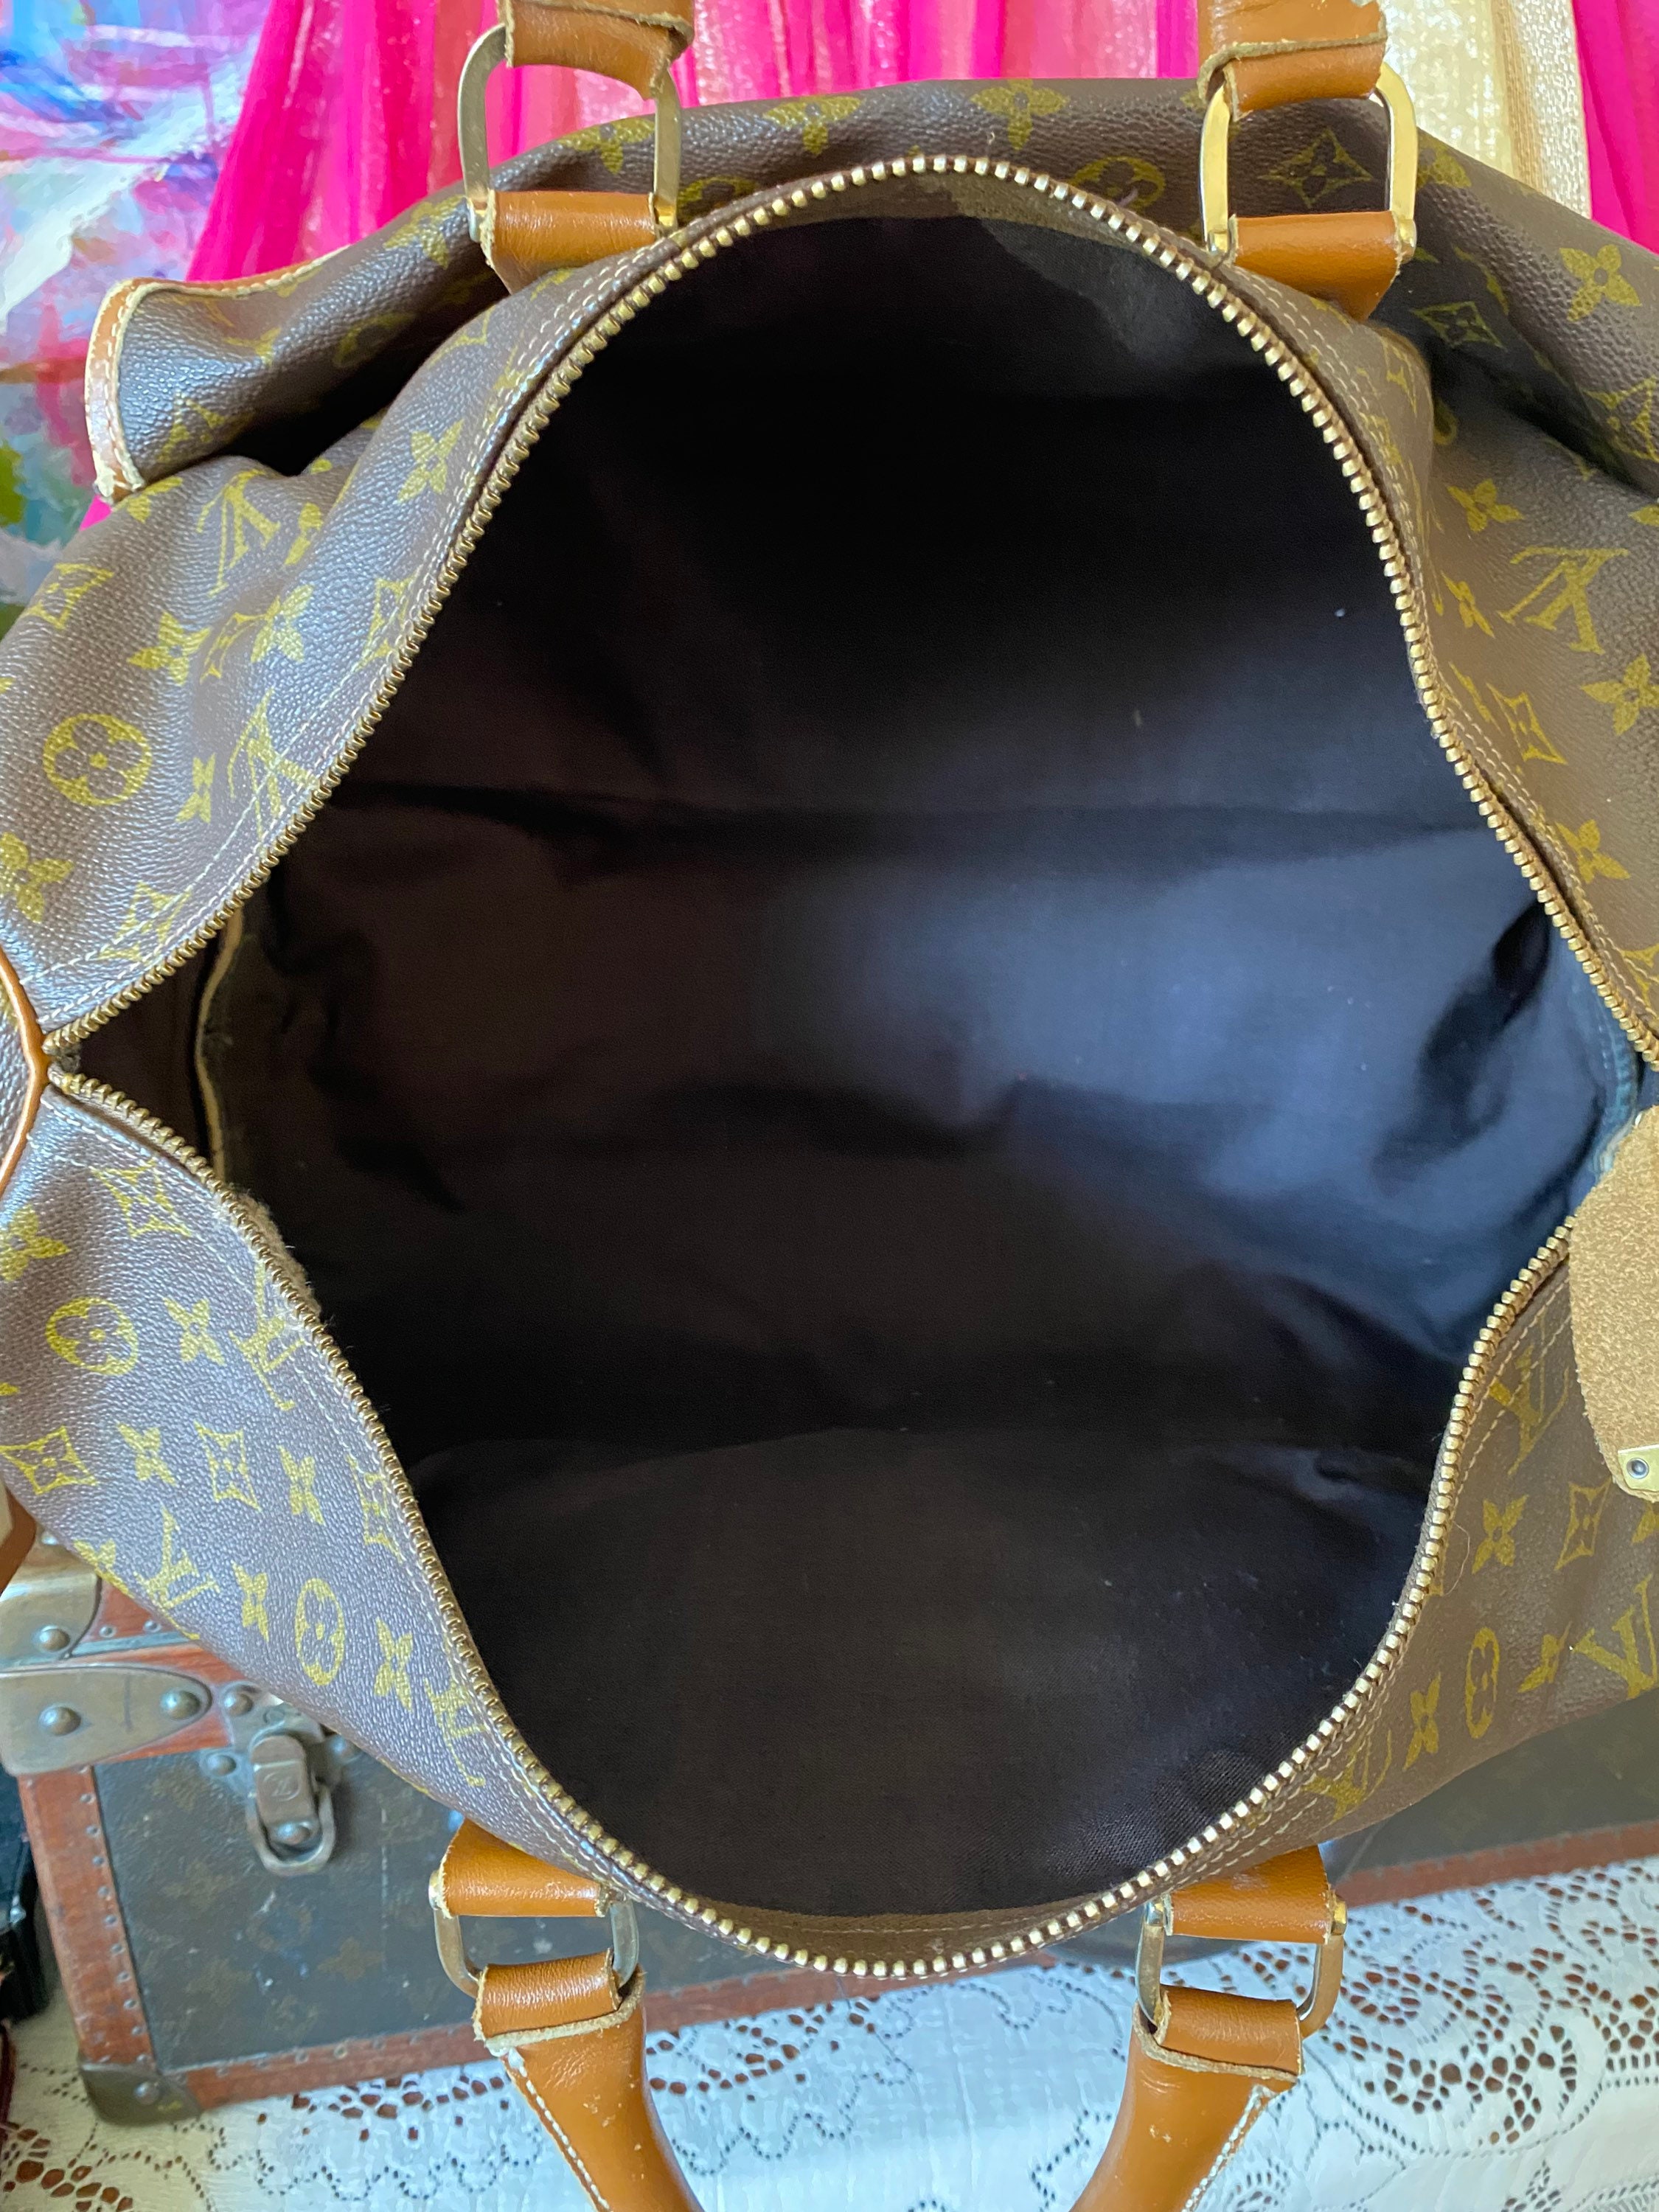 SALE Ultra Rare Handsome Vintage LOUIS VUITTON French Company 